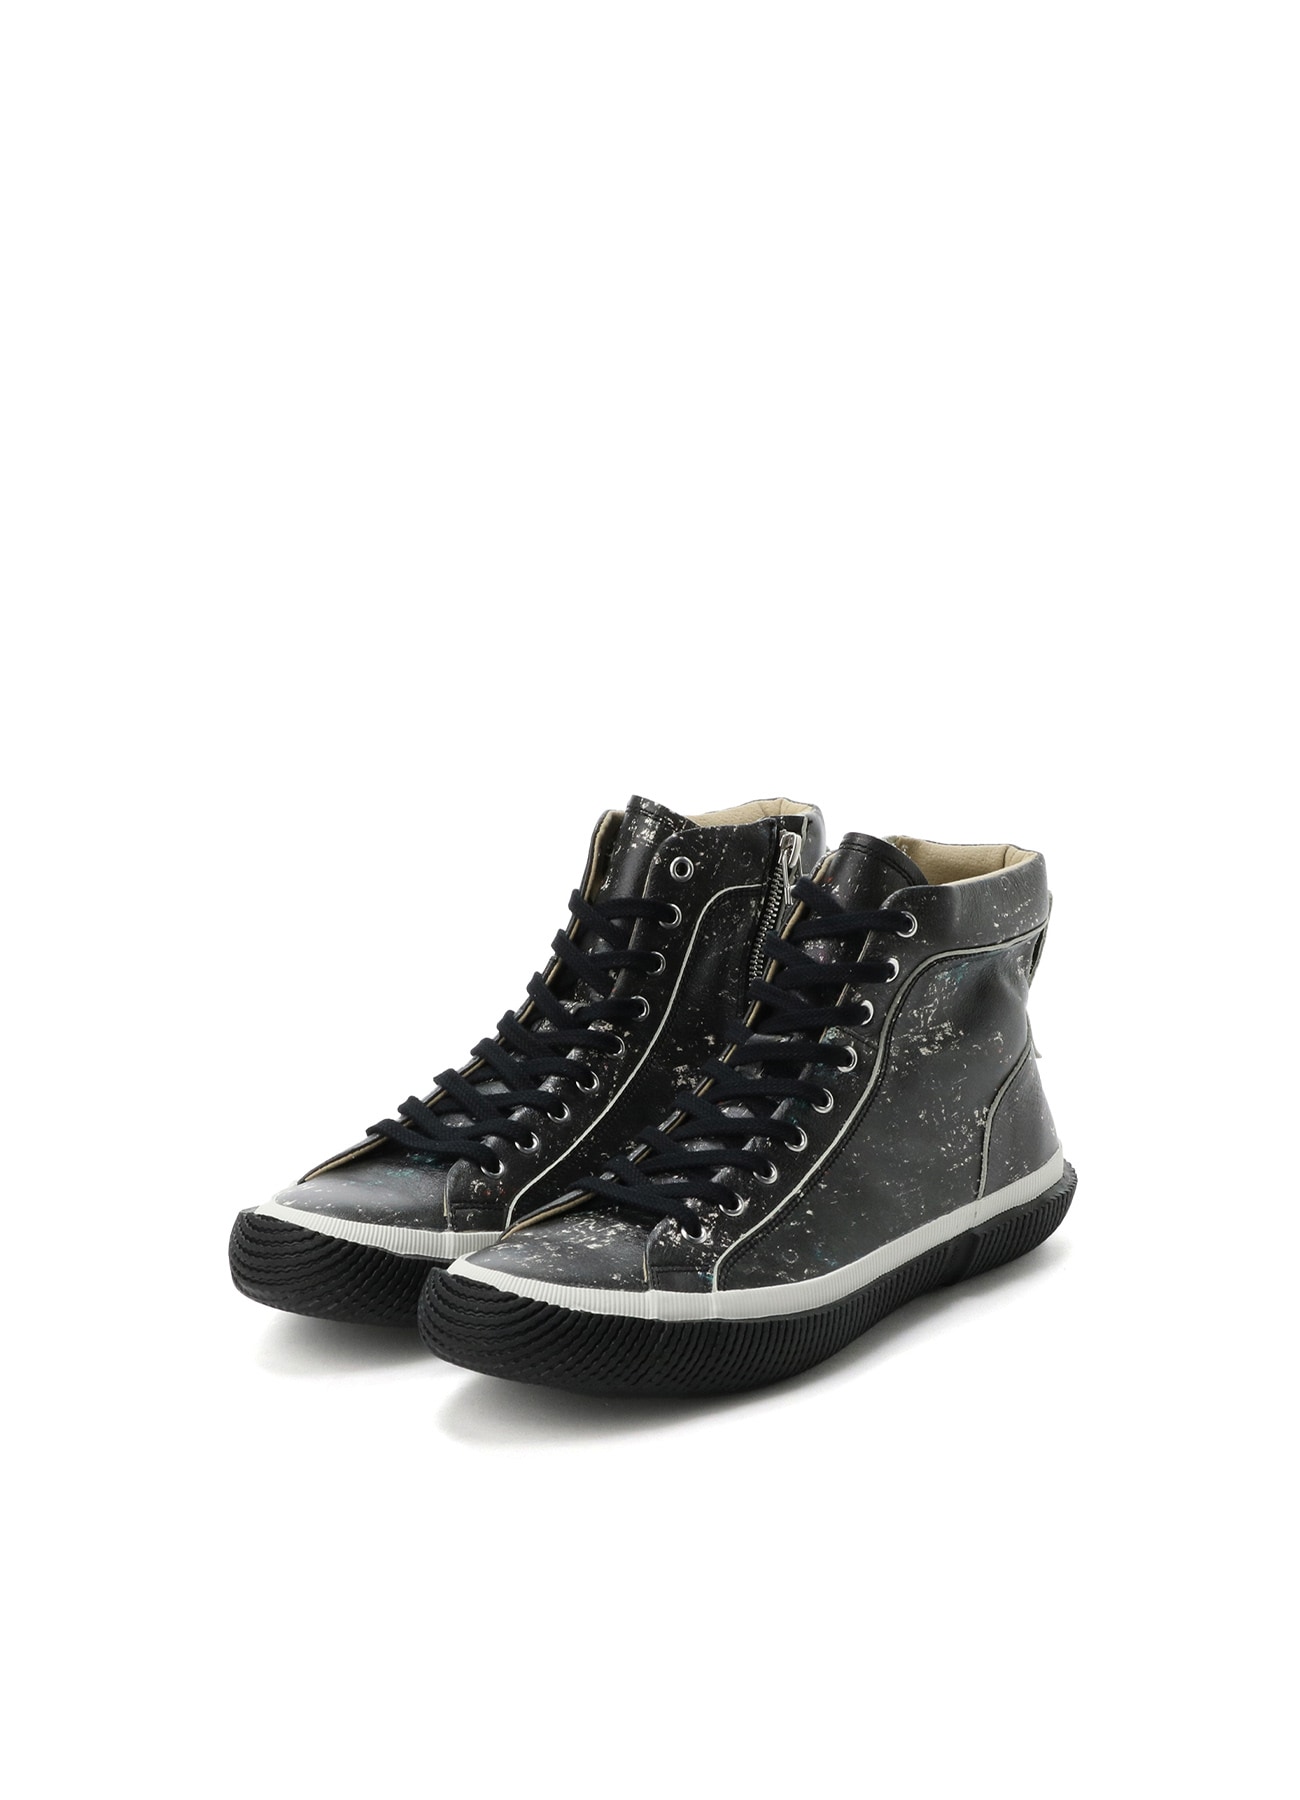 LEATHER SMOOTH HIGH-TOP SNEAKERS